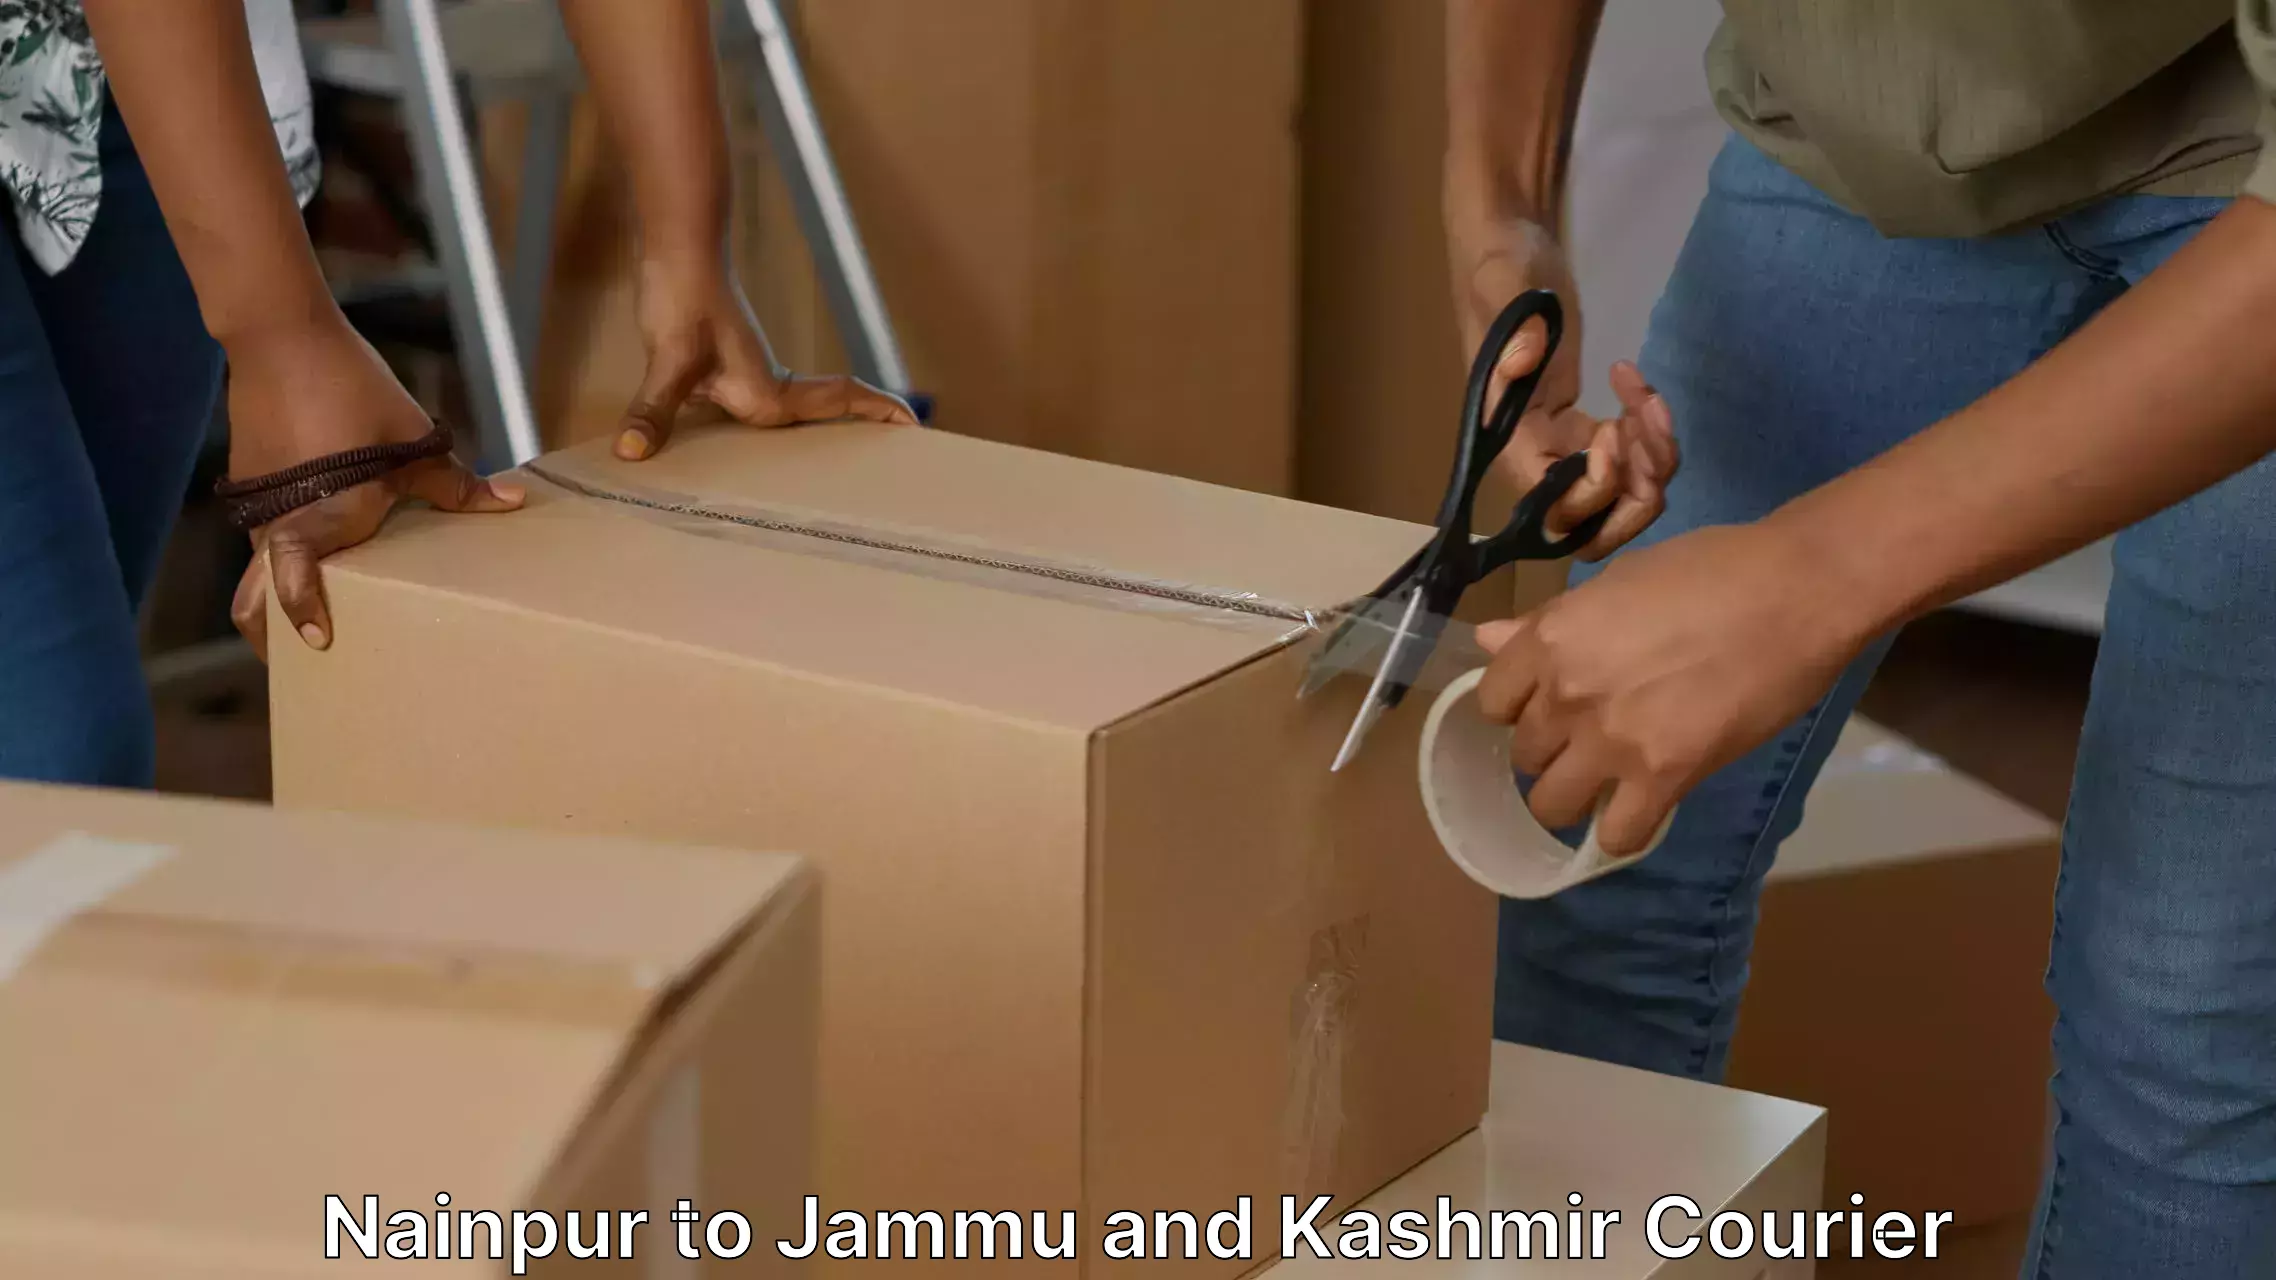 Furniture relocation experts Nainpur to University of Jammu